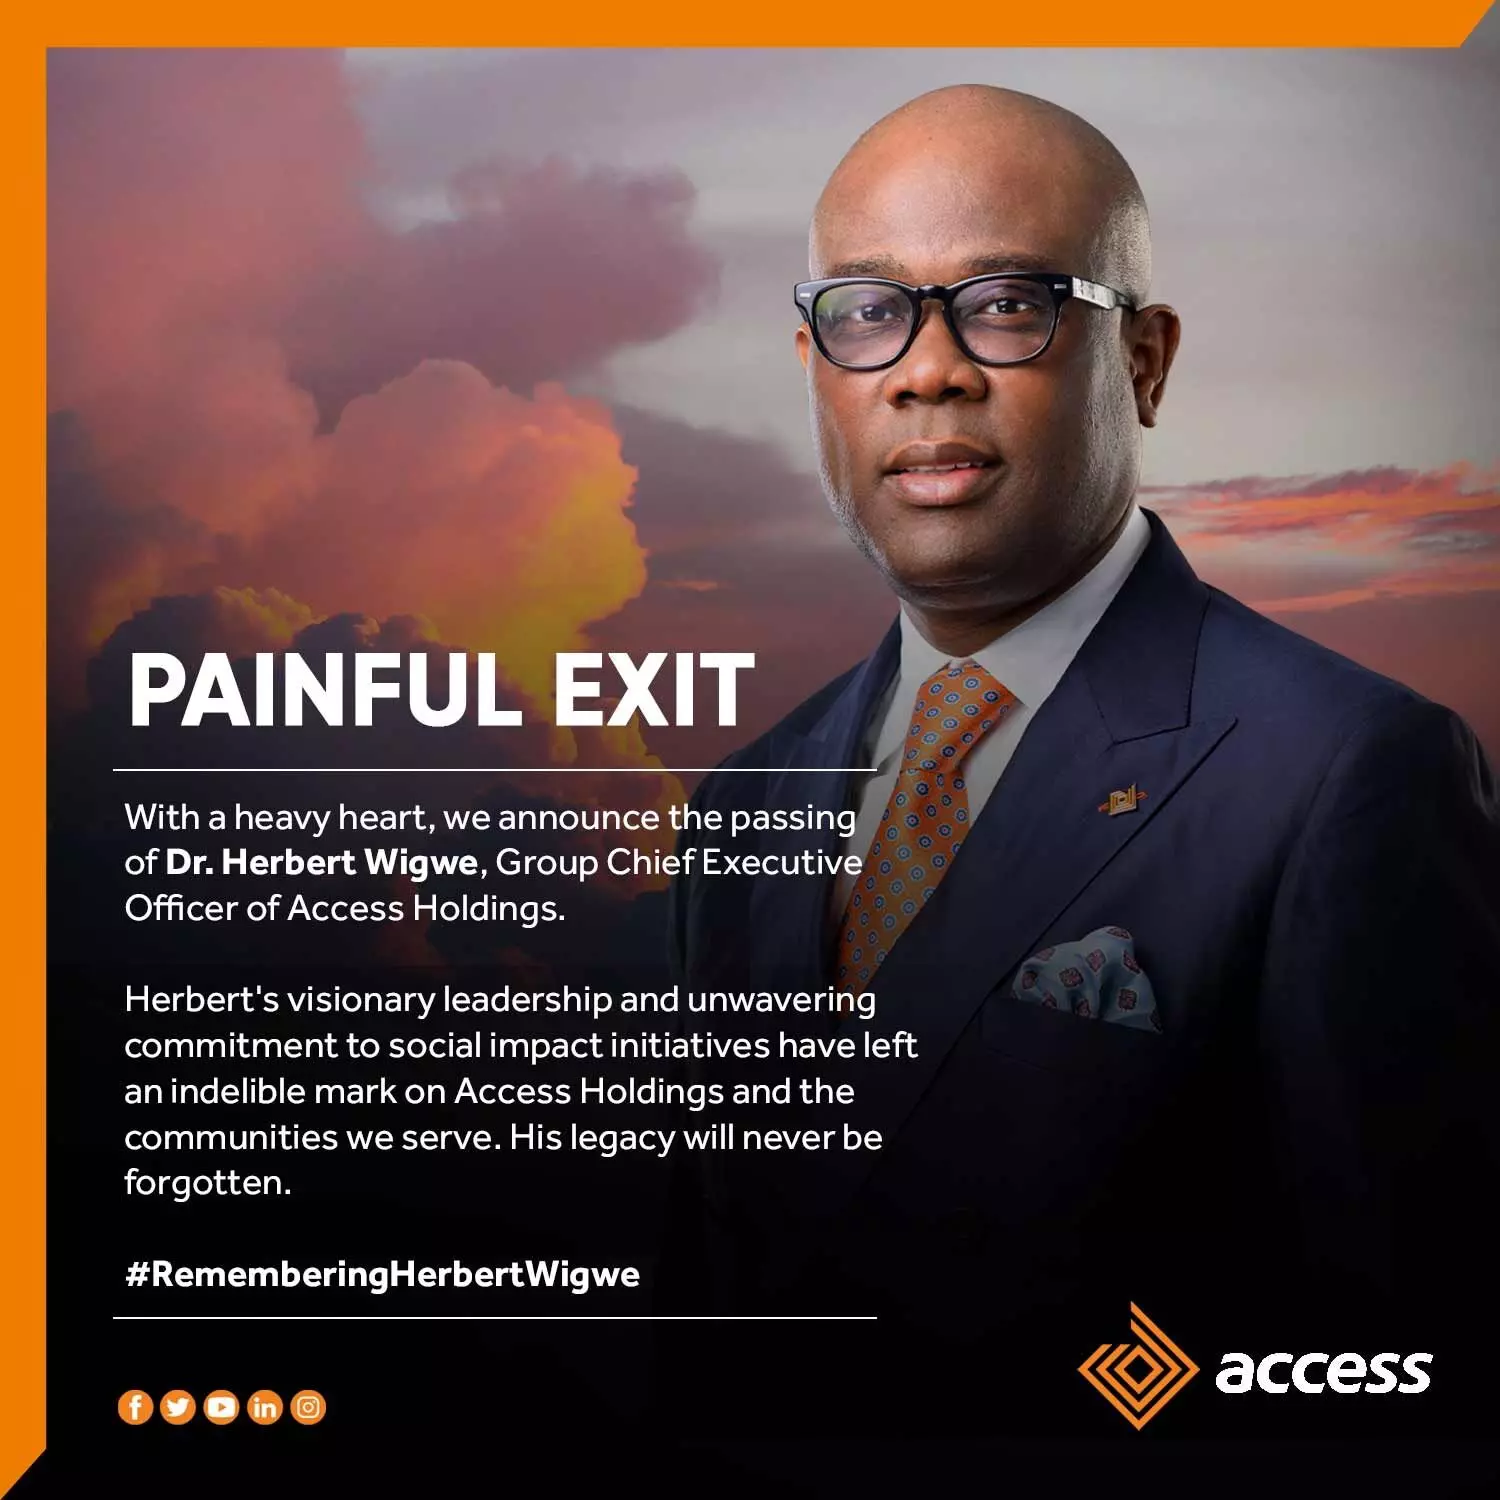 Access Holdings Plc Announces the Passing of its Group CEO, Dr. Herbert Wigwe, CFR